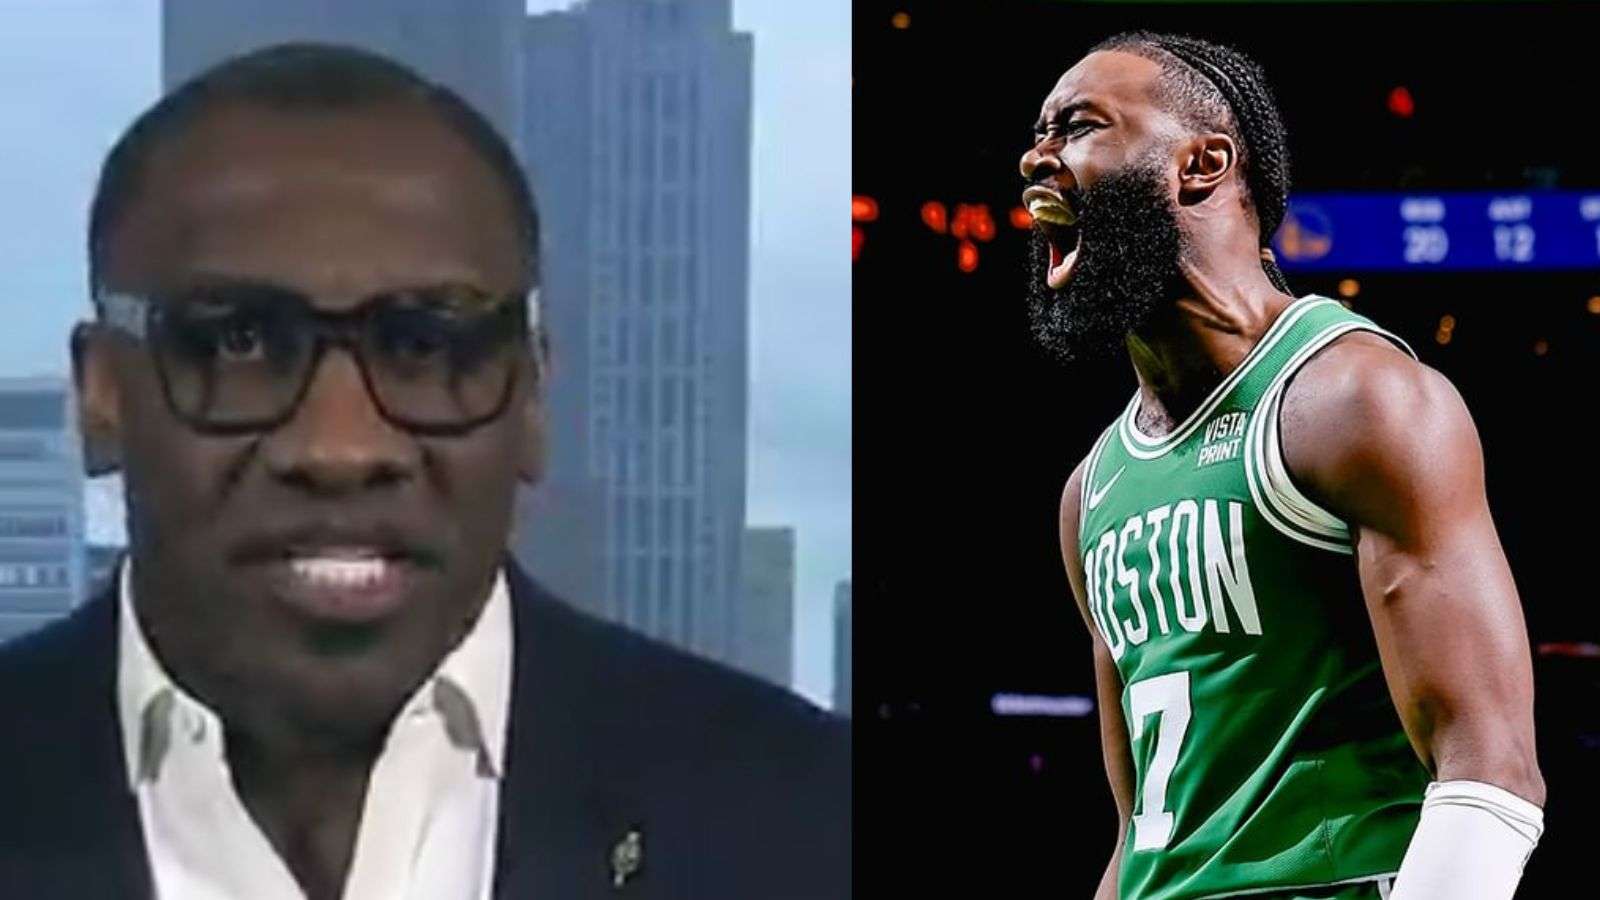 Shannon Sharpe on First Take 3/4/2024 (left) and Jaylen Brown playing for the Boston Celtics (right).